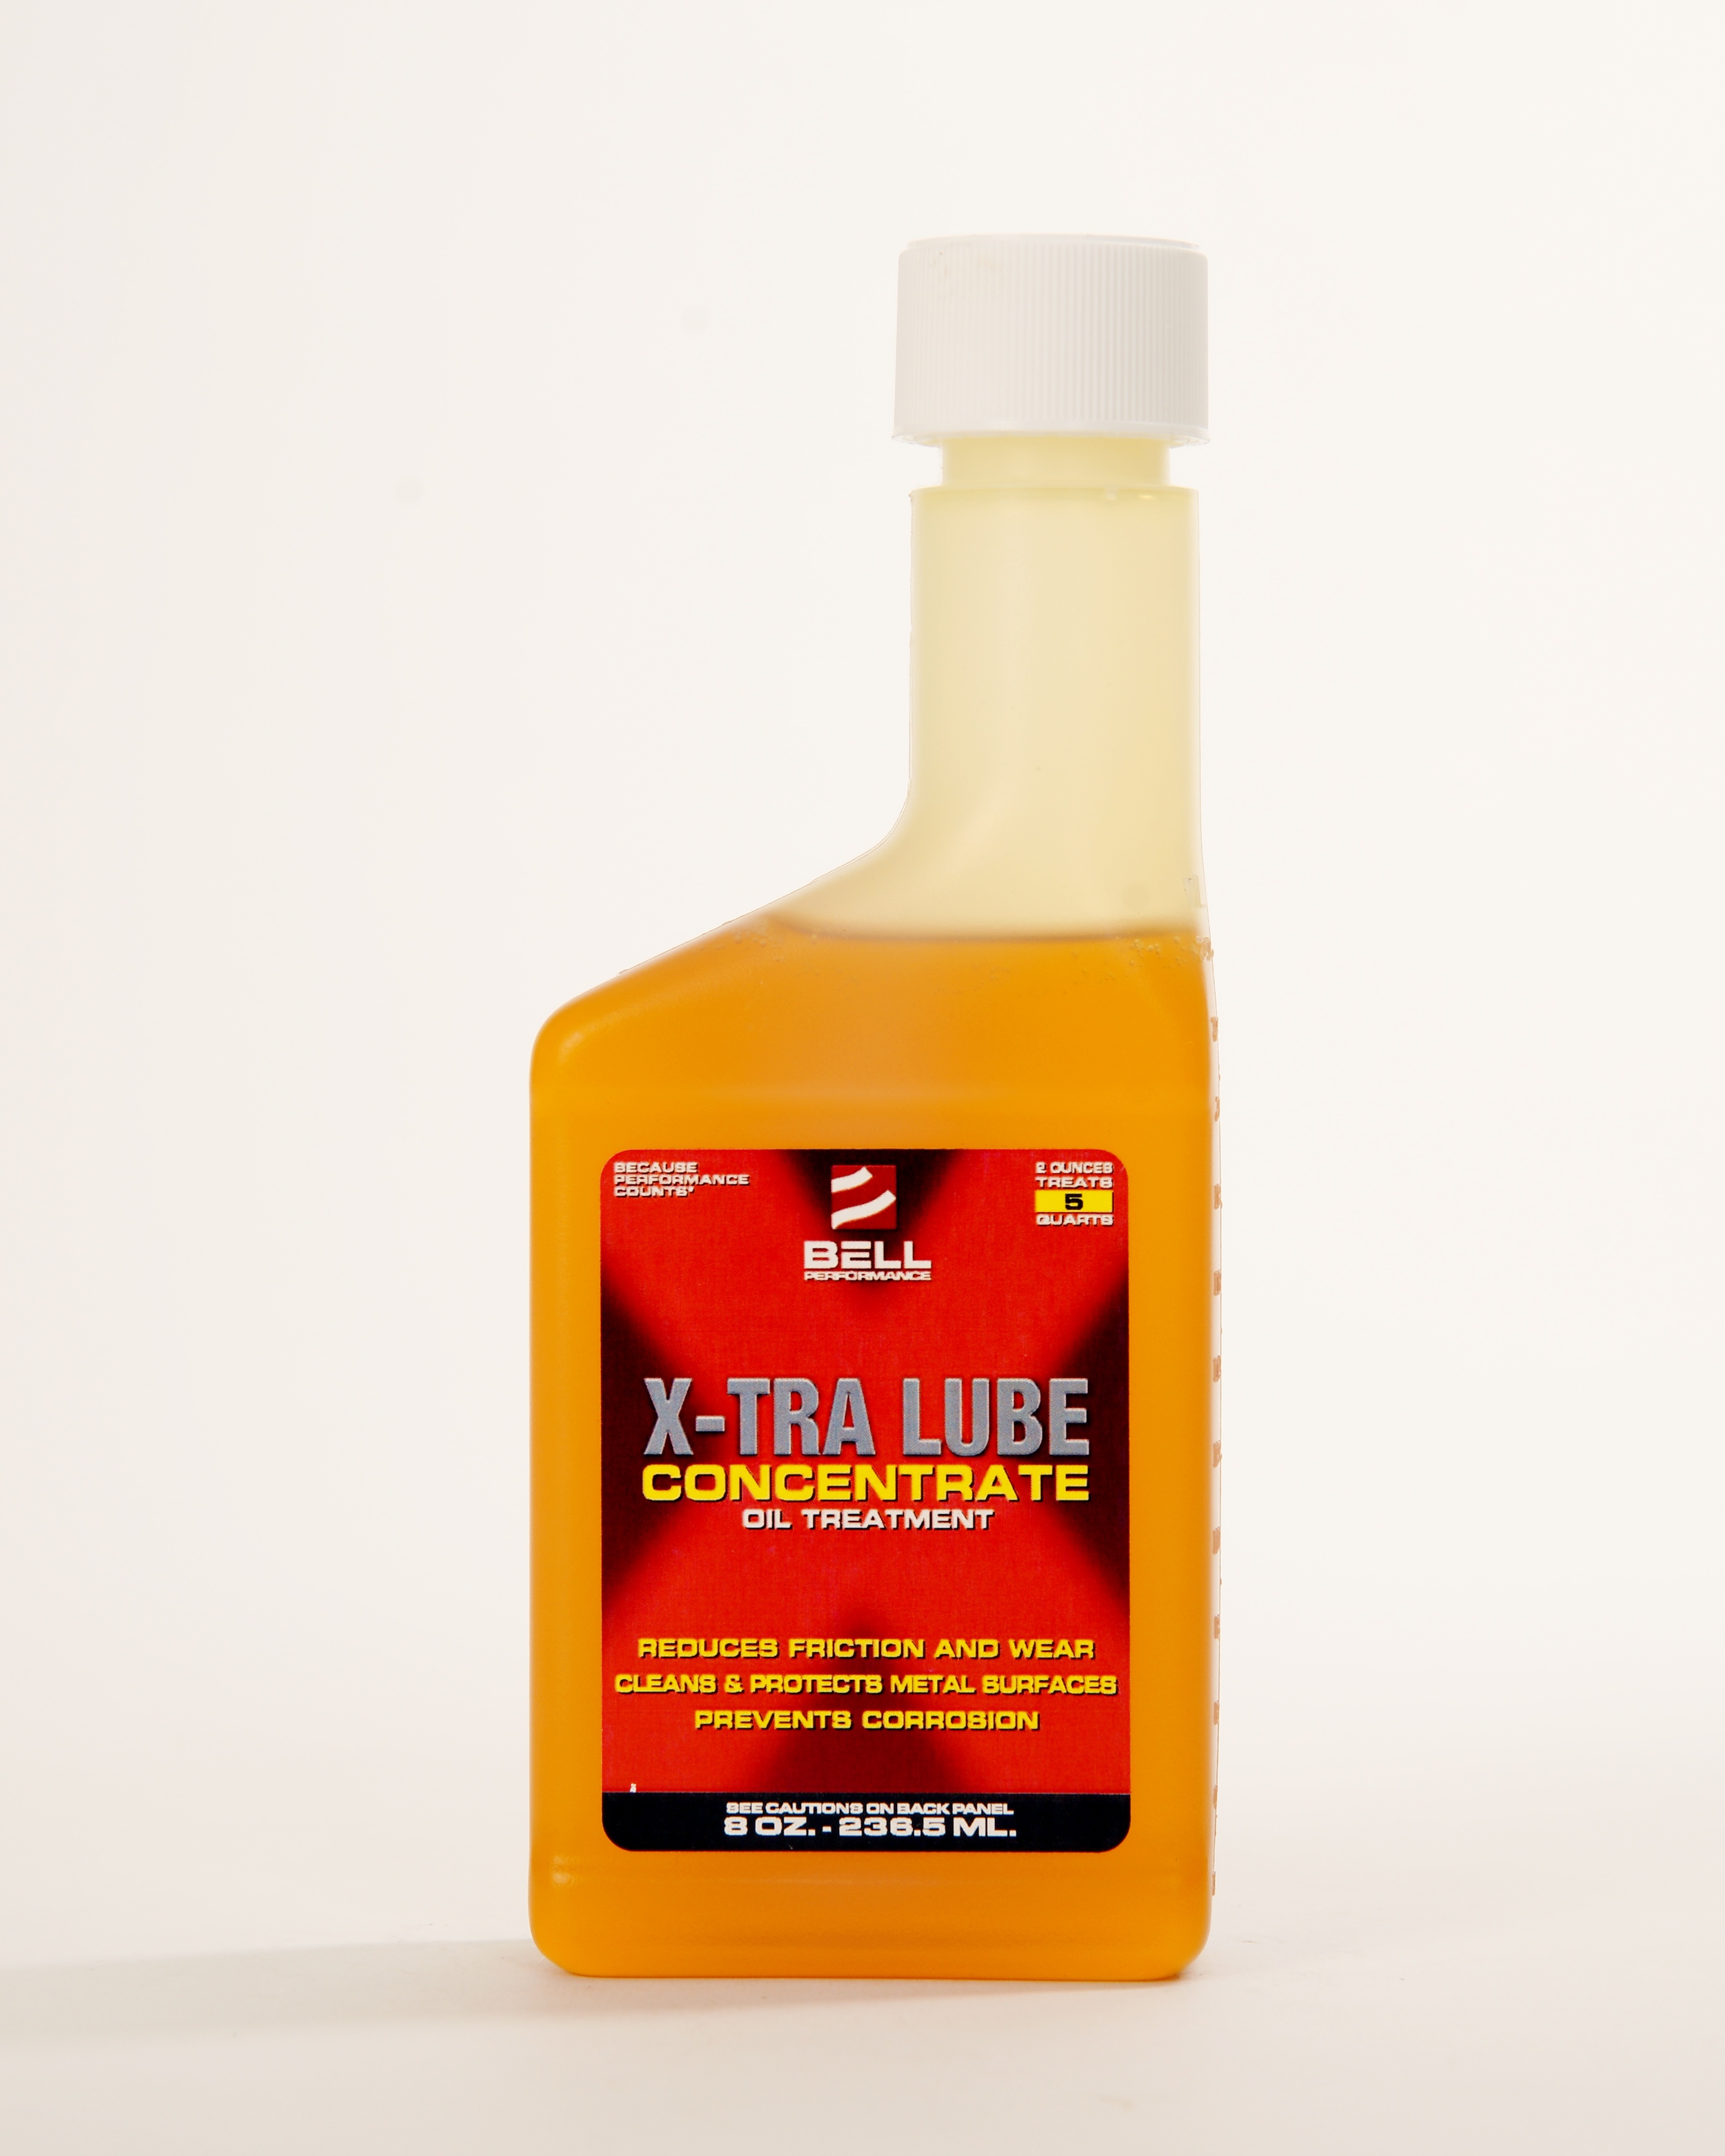 X-TRA LUBE CONCENTRATE 8 OZ